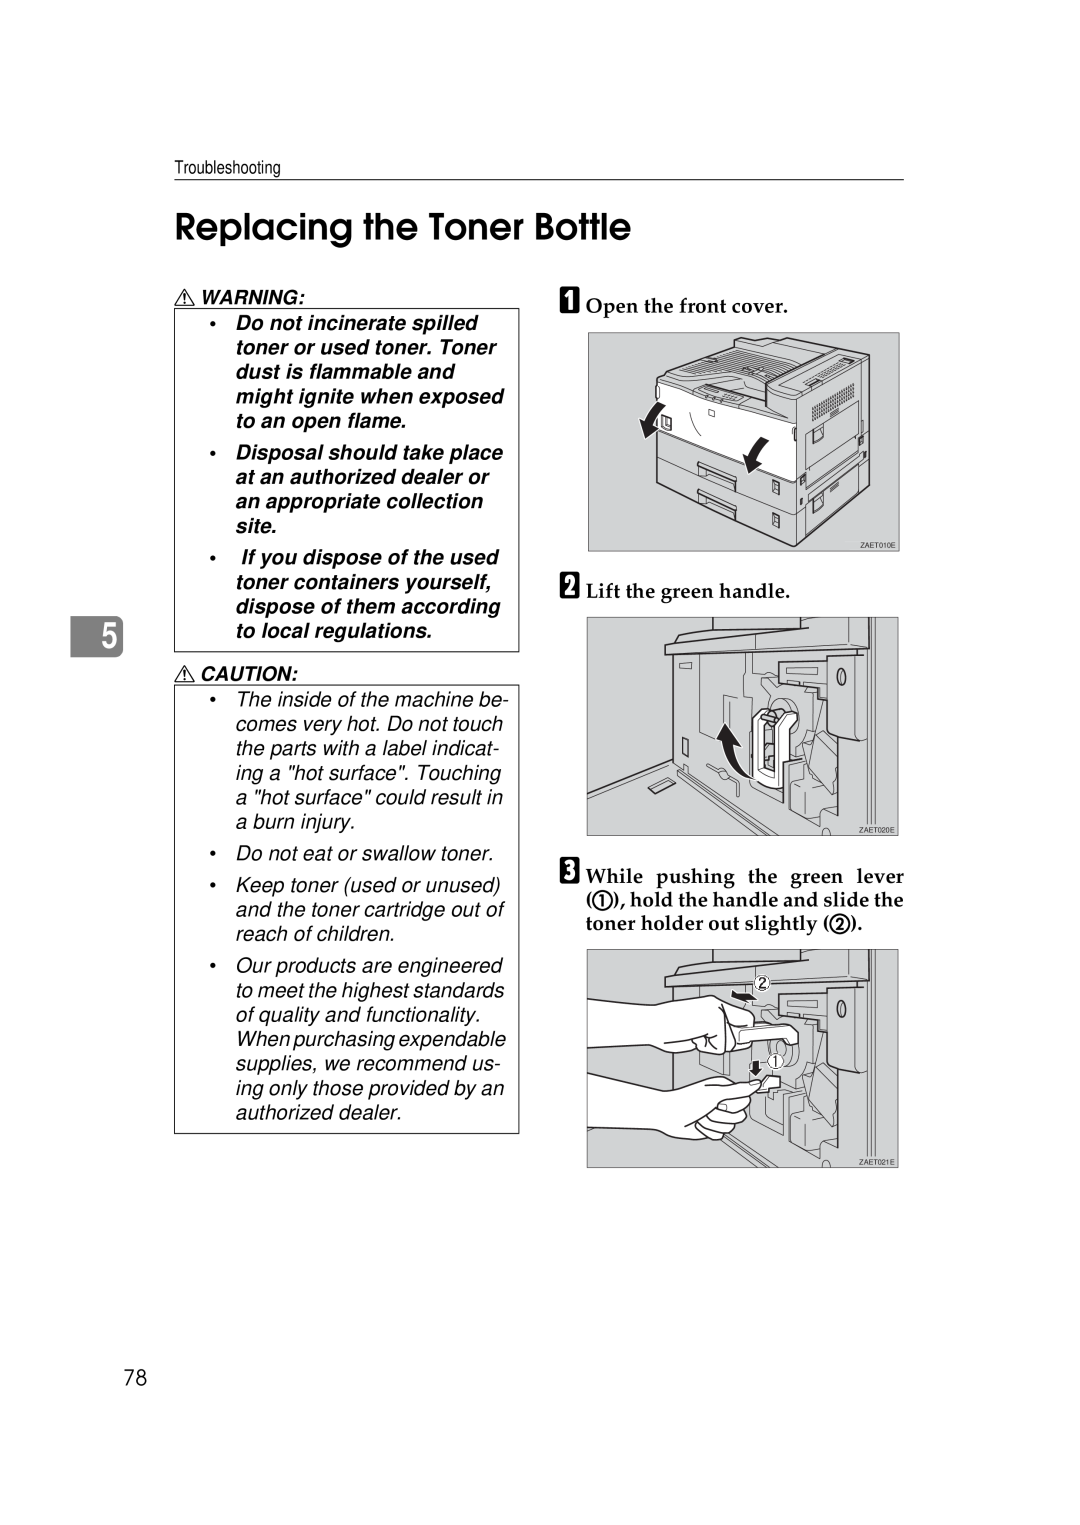 Ricoh Aficio AP2700 operating instructions Replacing the Toner Bottle, A Open the front cover, B Lift the green handle 